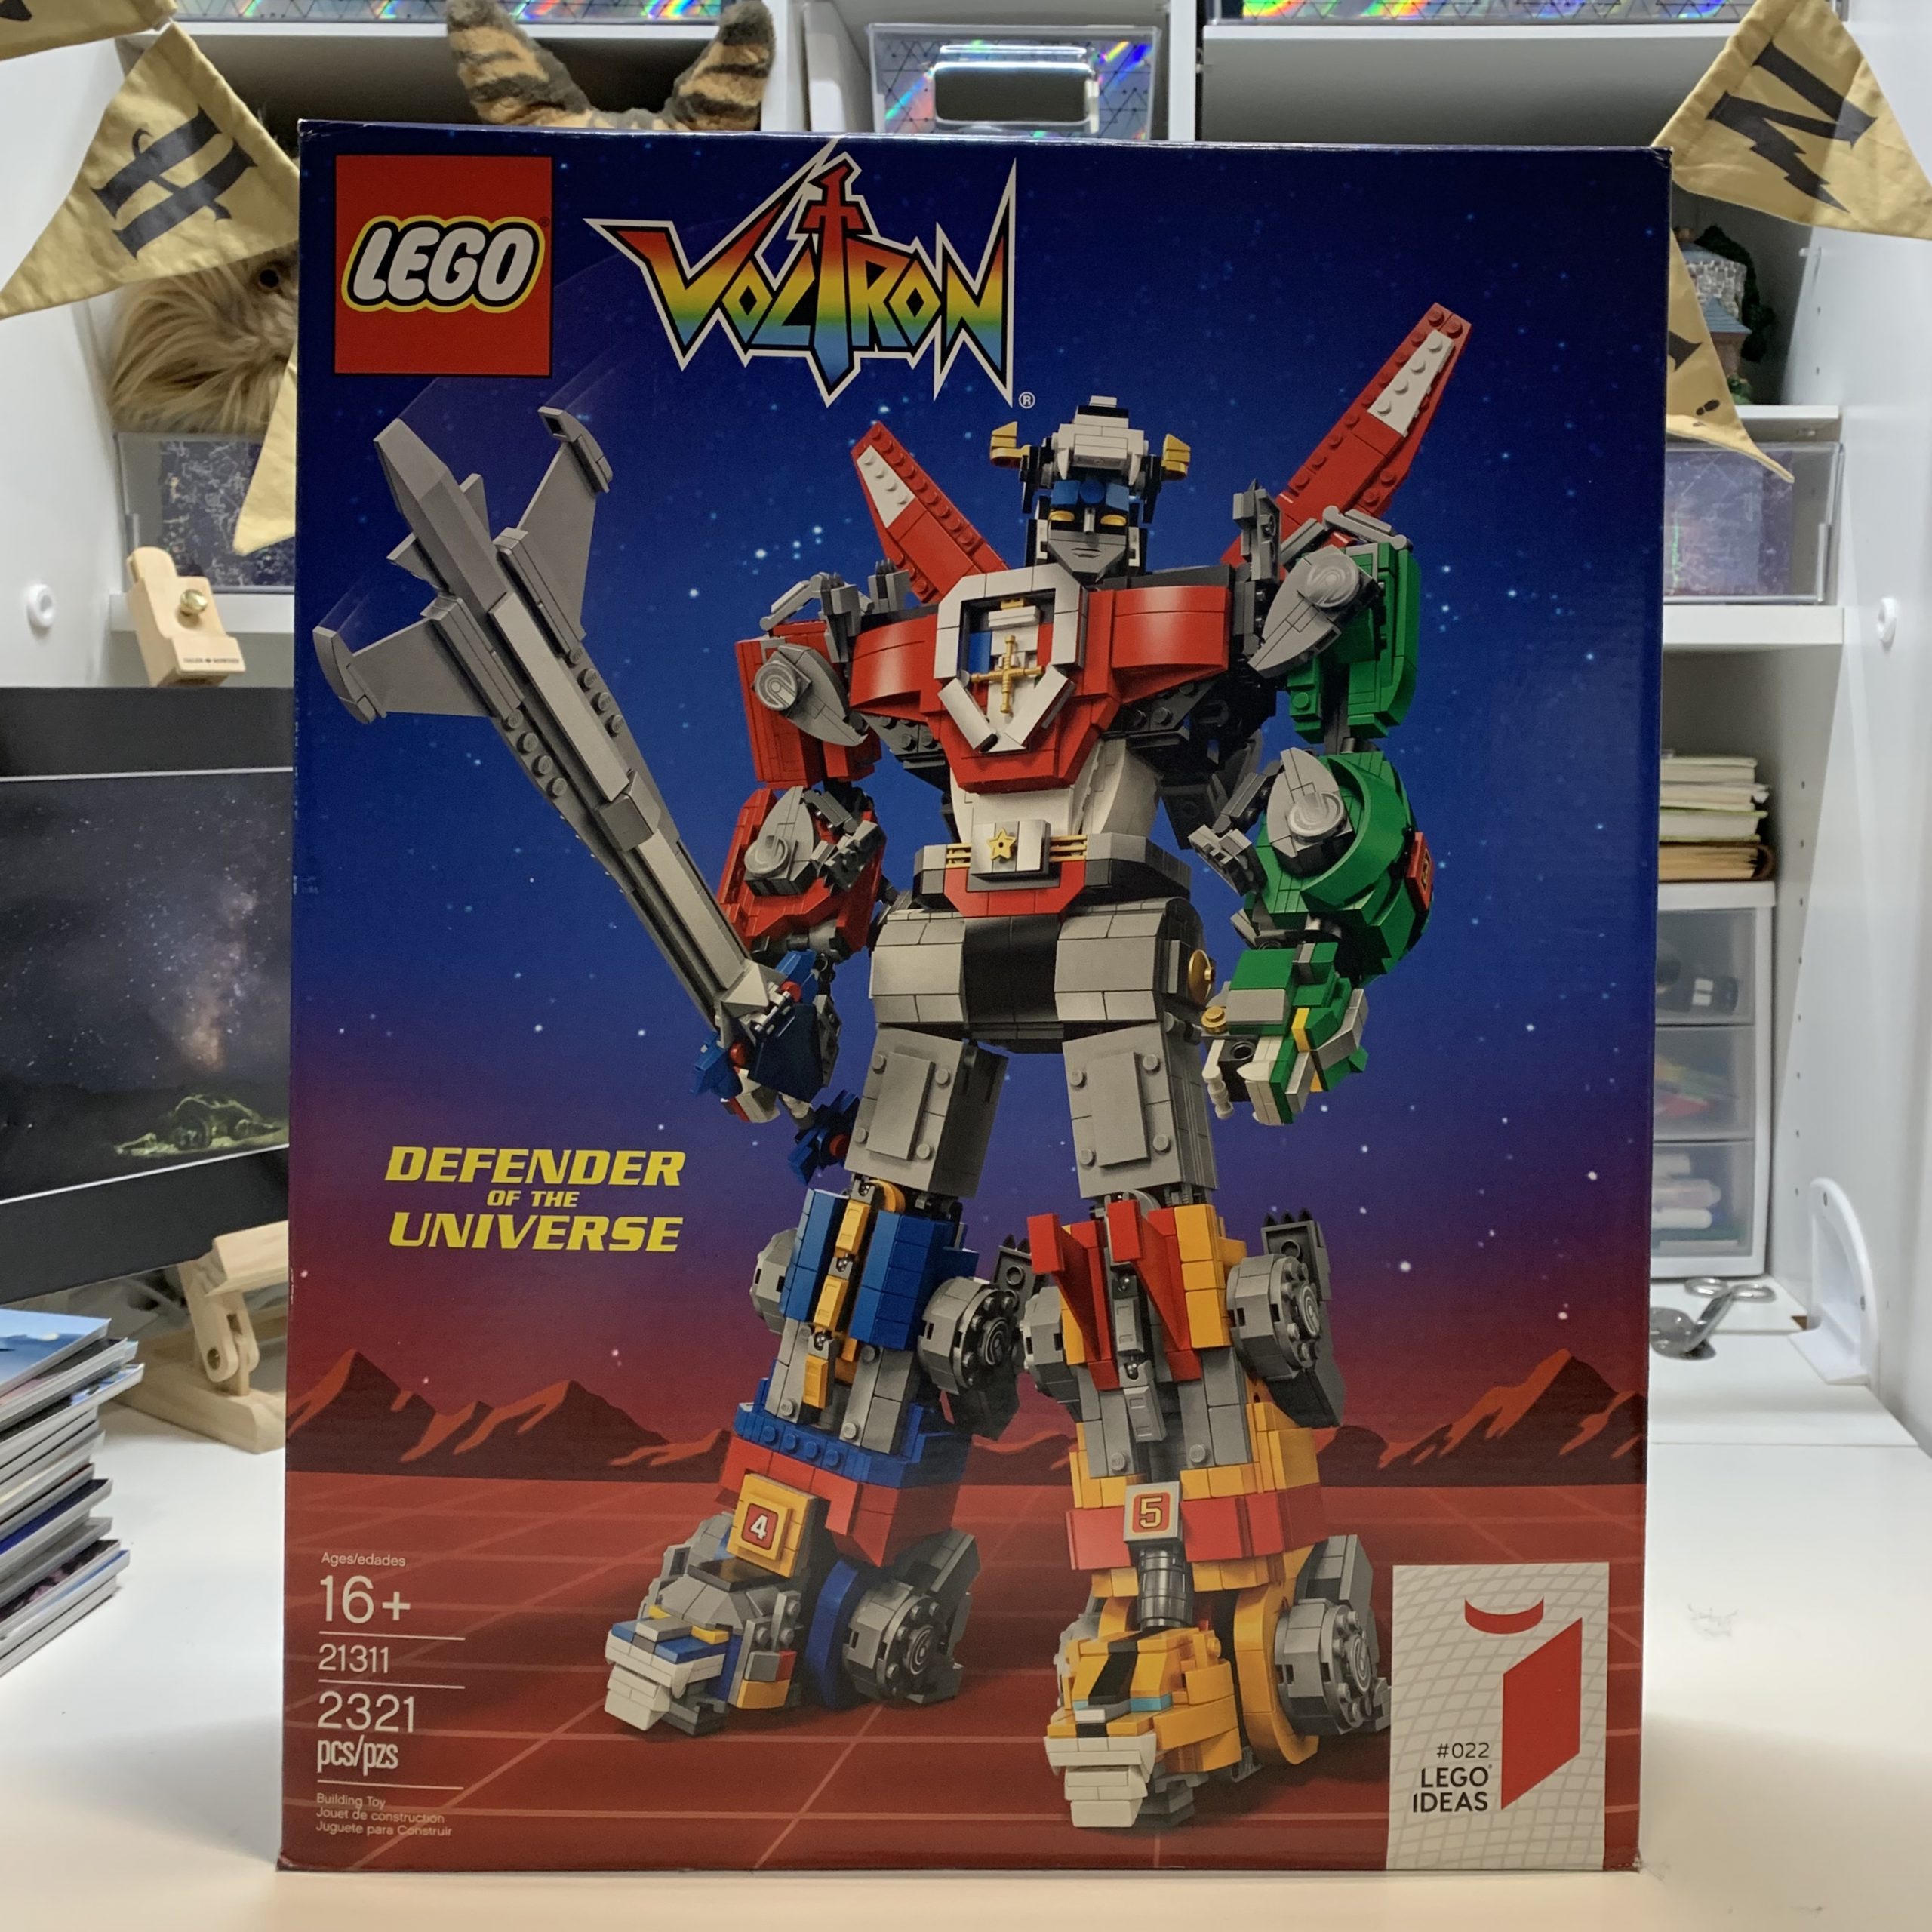 Ready to Form Voltron!